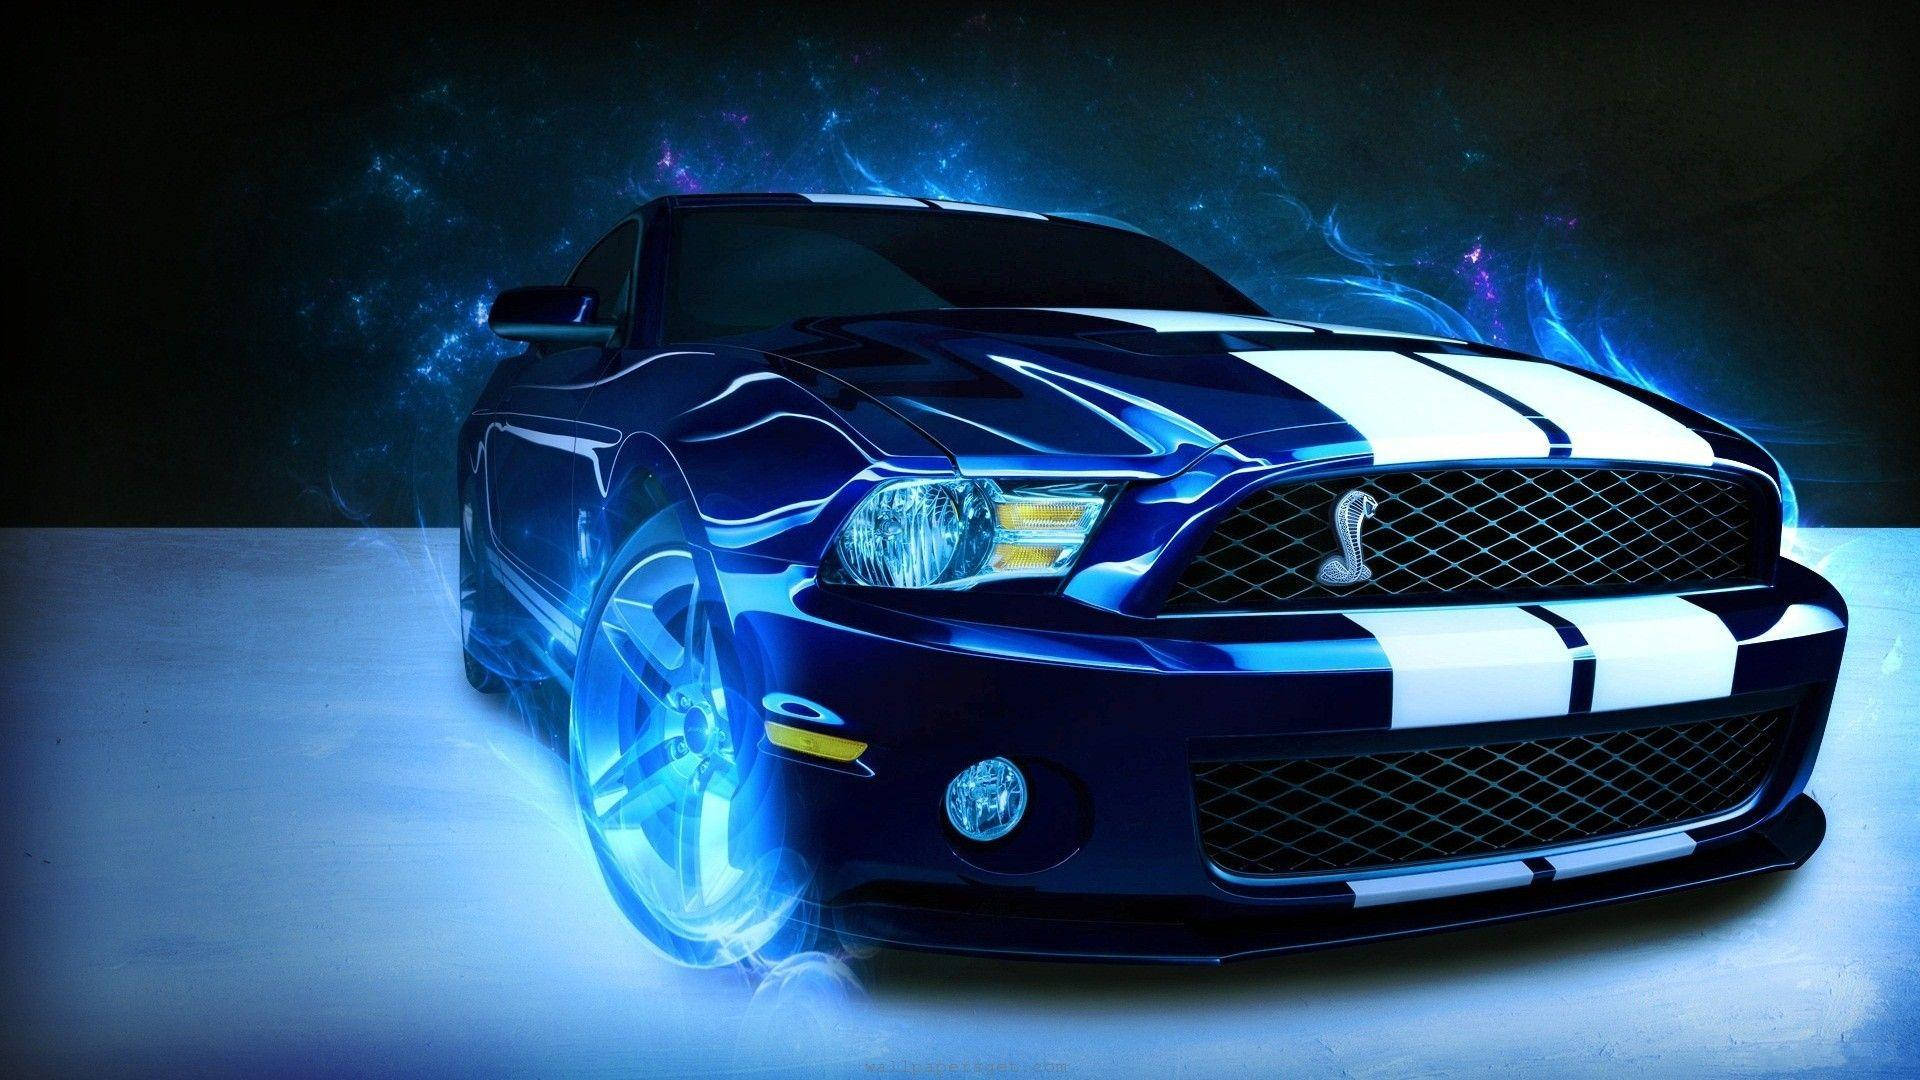 Blauessportauto Ford Mustang Shelby Wallpaper